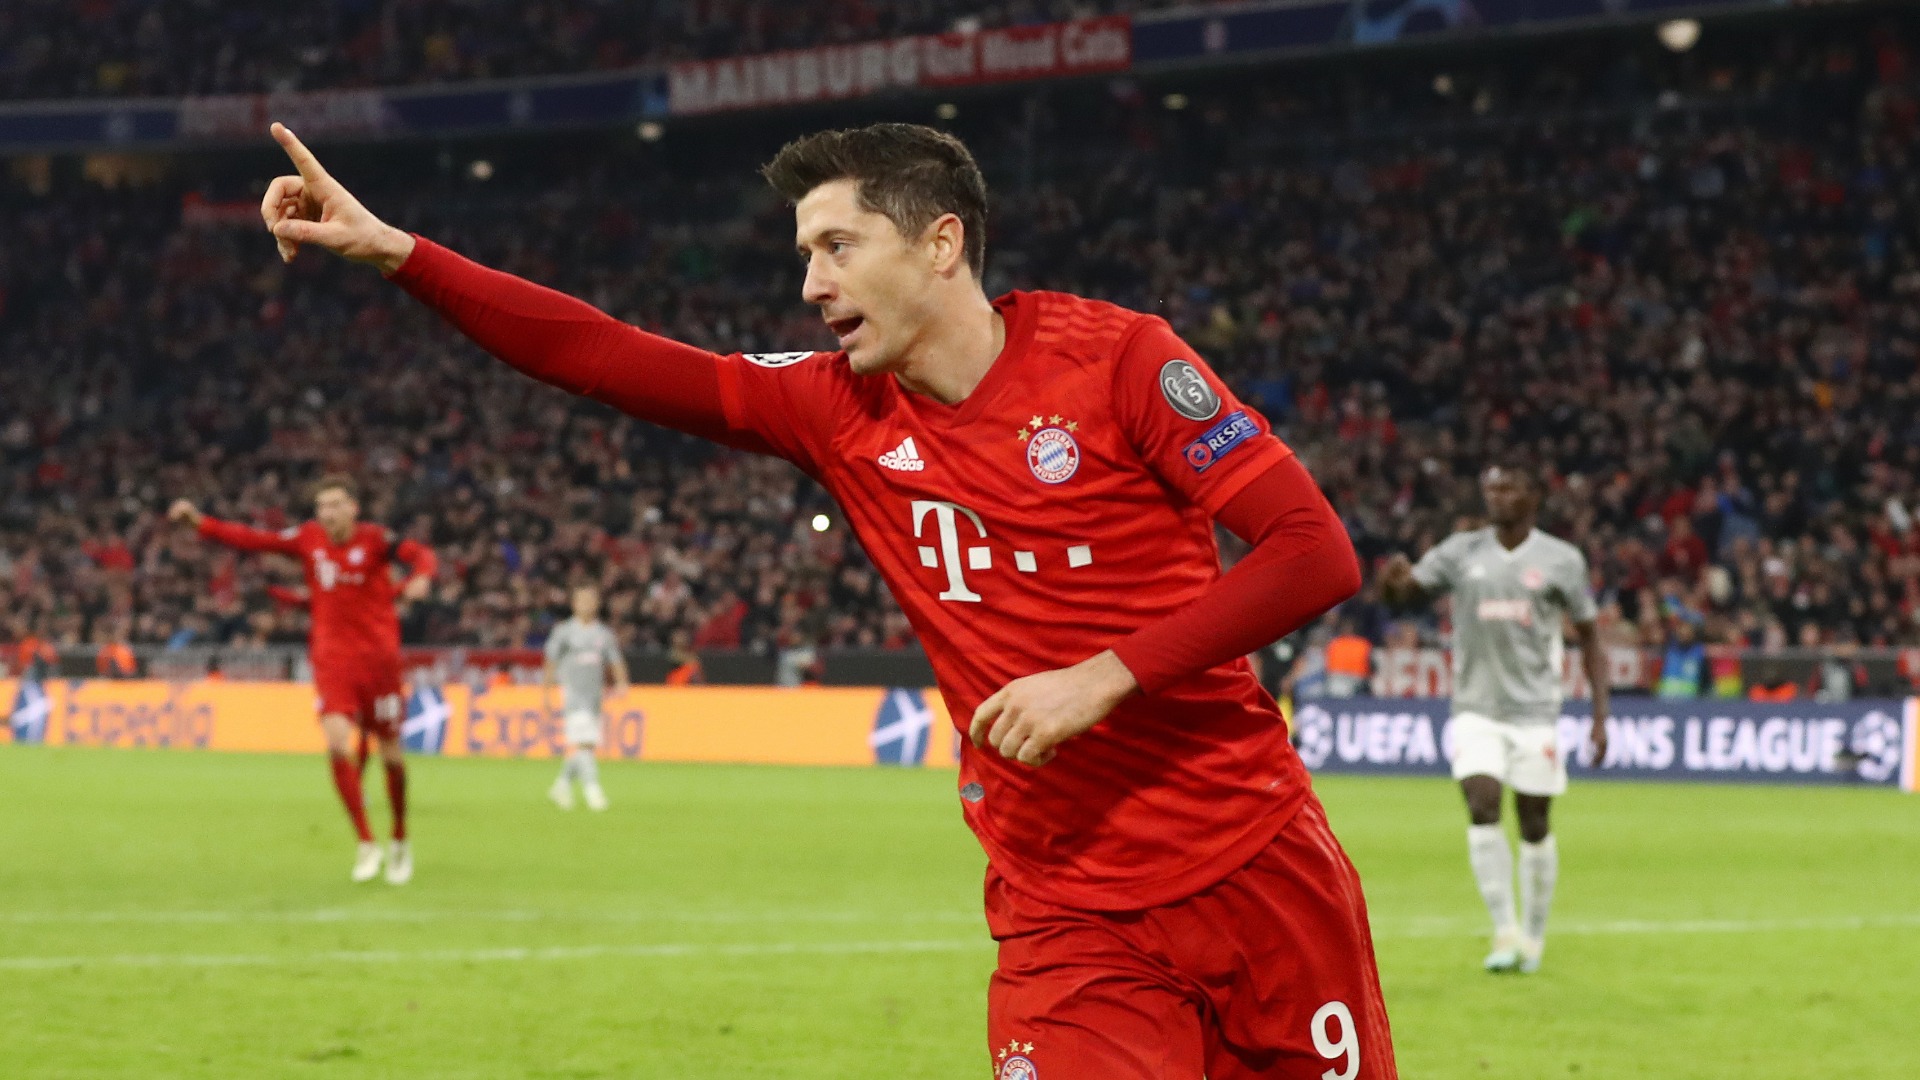 Robert Lewandowski and Cristiano Ronaldo feature in the best Opta facts ahead of Wednesday's eight Champions League matches.